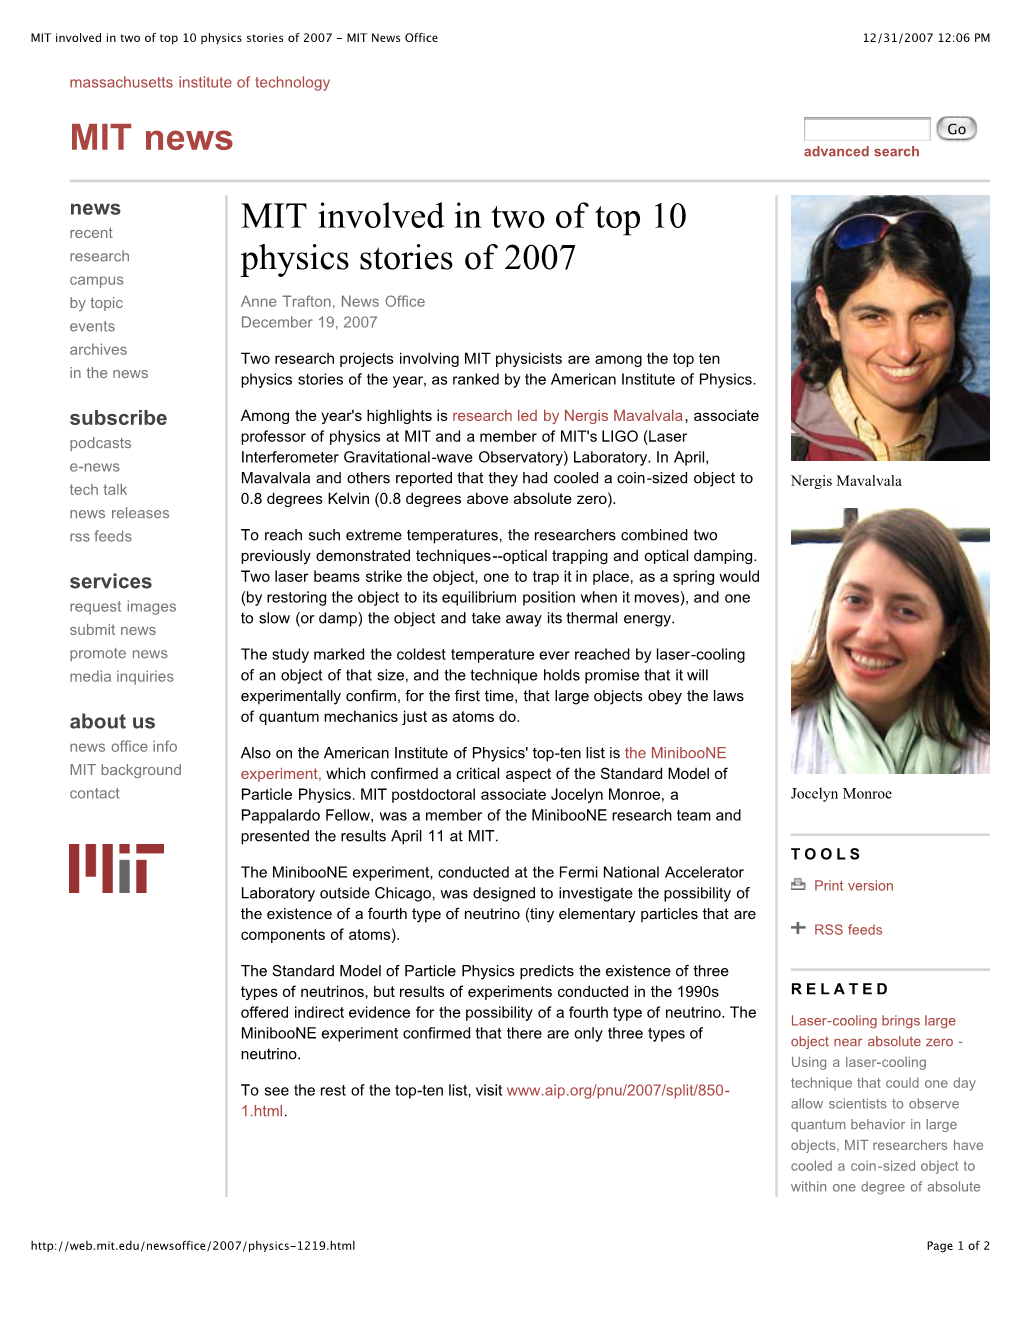 MIT Involved in Two of Top 10 Physics Stories of 2007 - MIT News Office 12/31/2007 12:06 PM